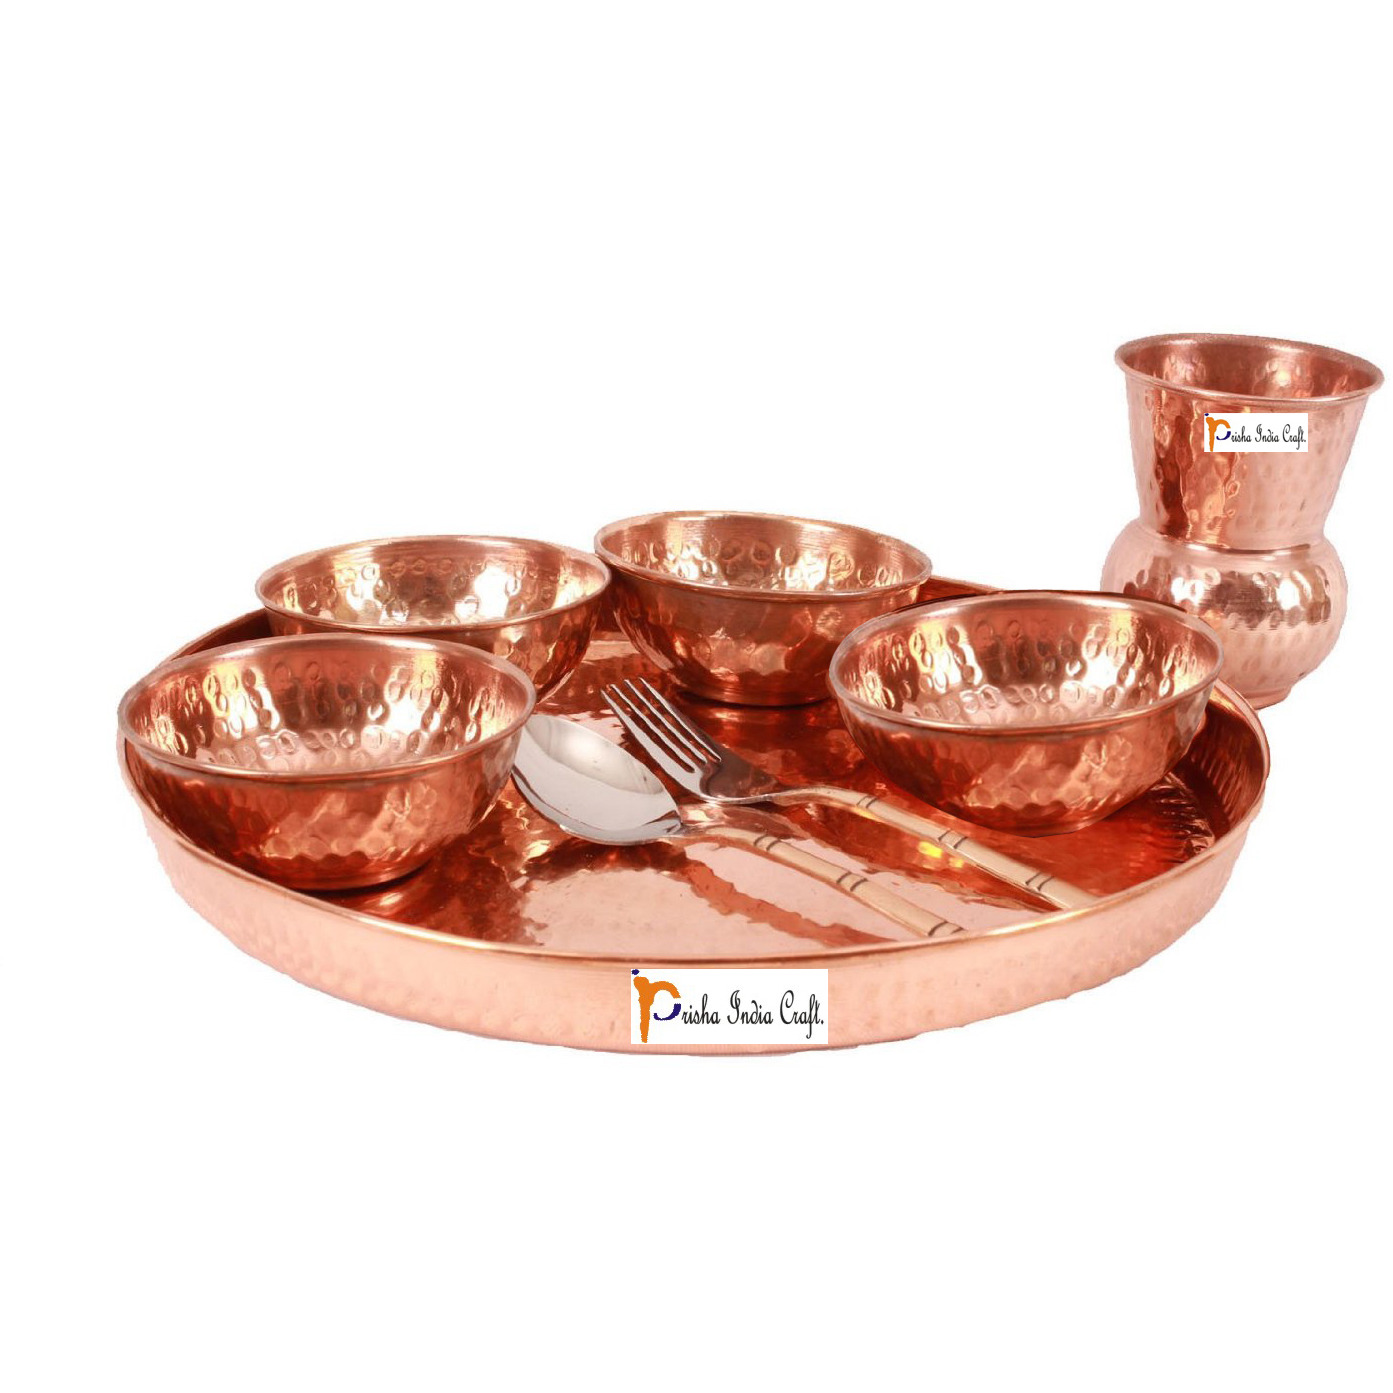 Prisha India Craft B. Set of 6 Dinnerware Traditional 100% Pure Copper Dinner Set of Thali Plate, Bowls, Glass and Spoon, Dia 12  With 1 Embossed Stainless Steel Copper Pitcher Jug - Christmas Gift